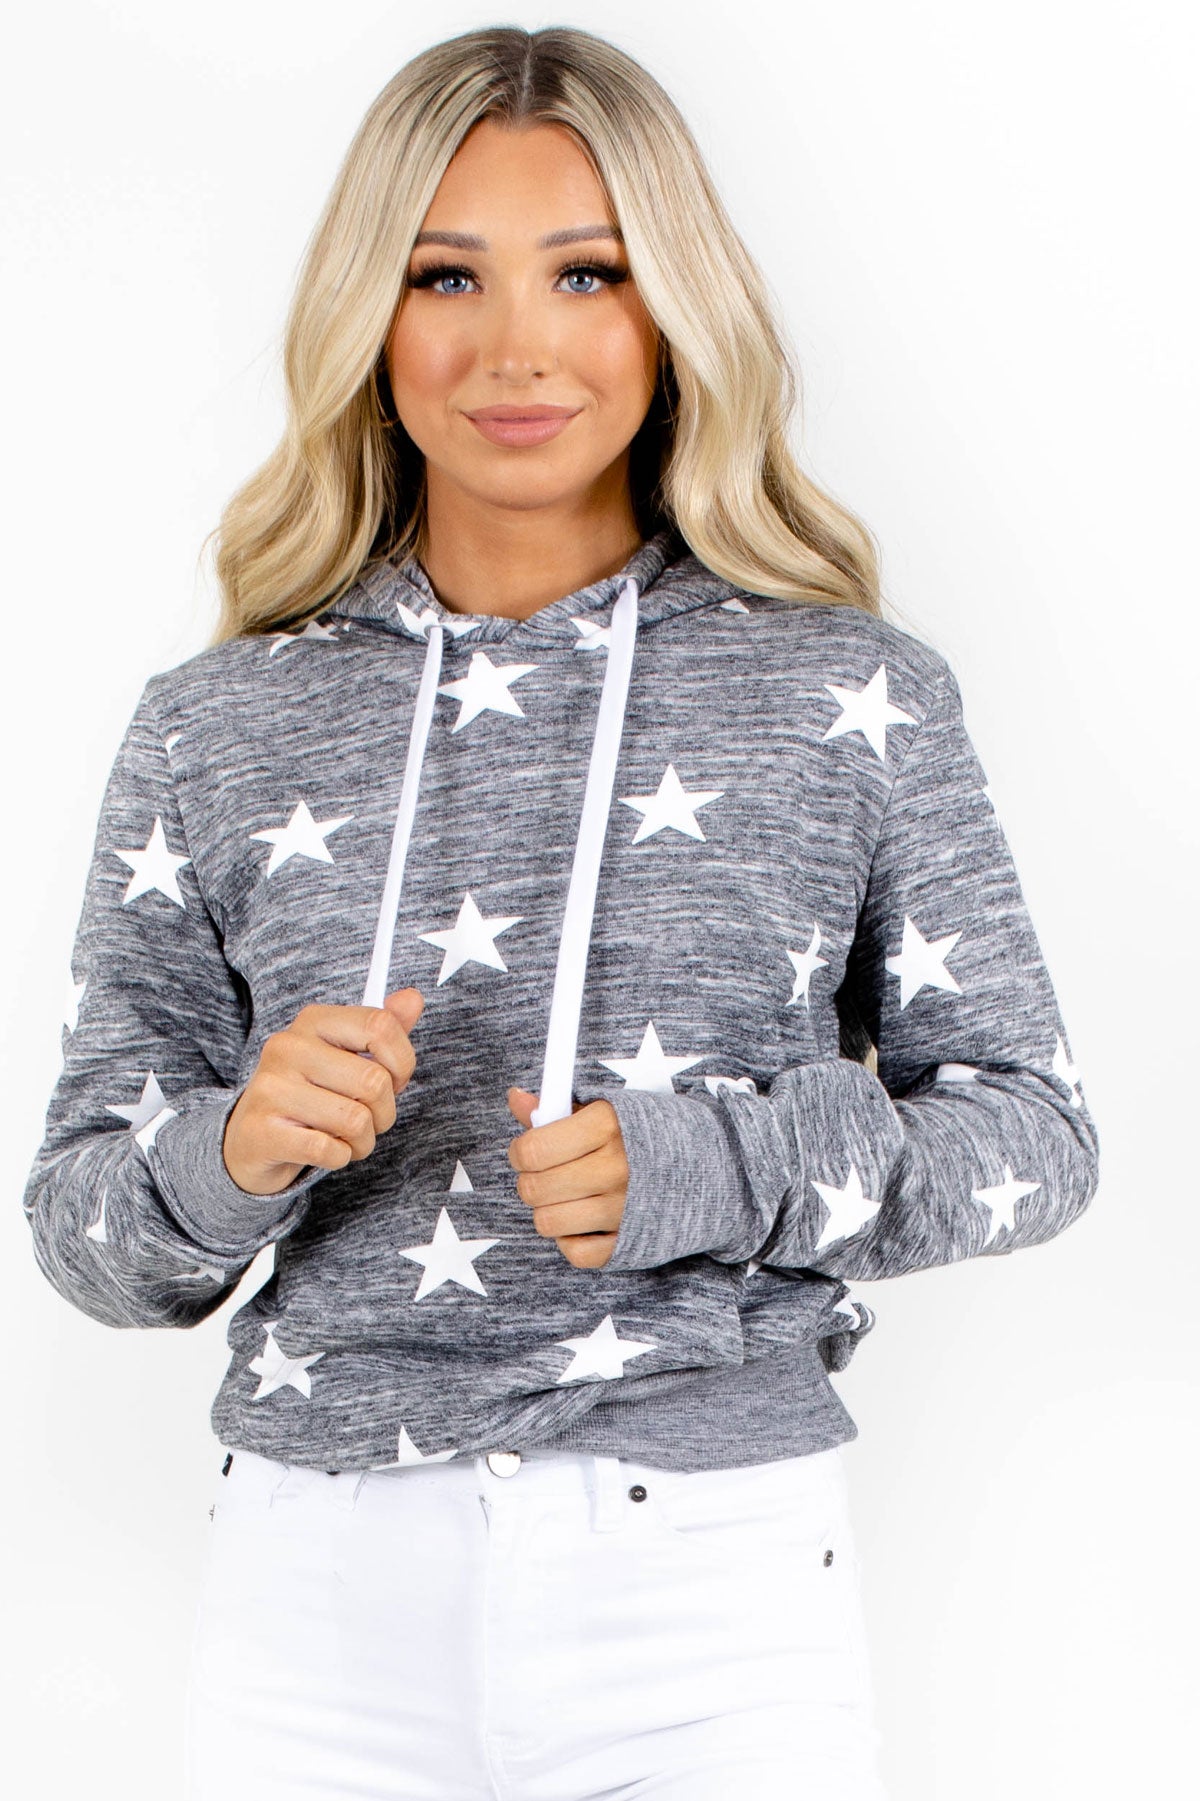 Gray hooded top with pockets and star patterns